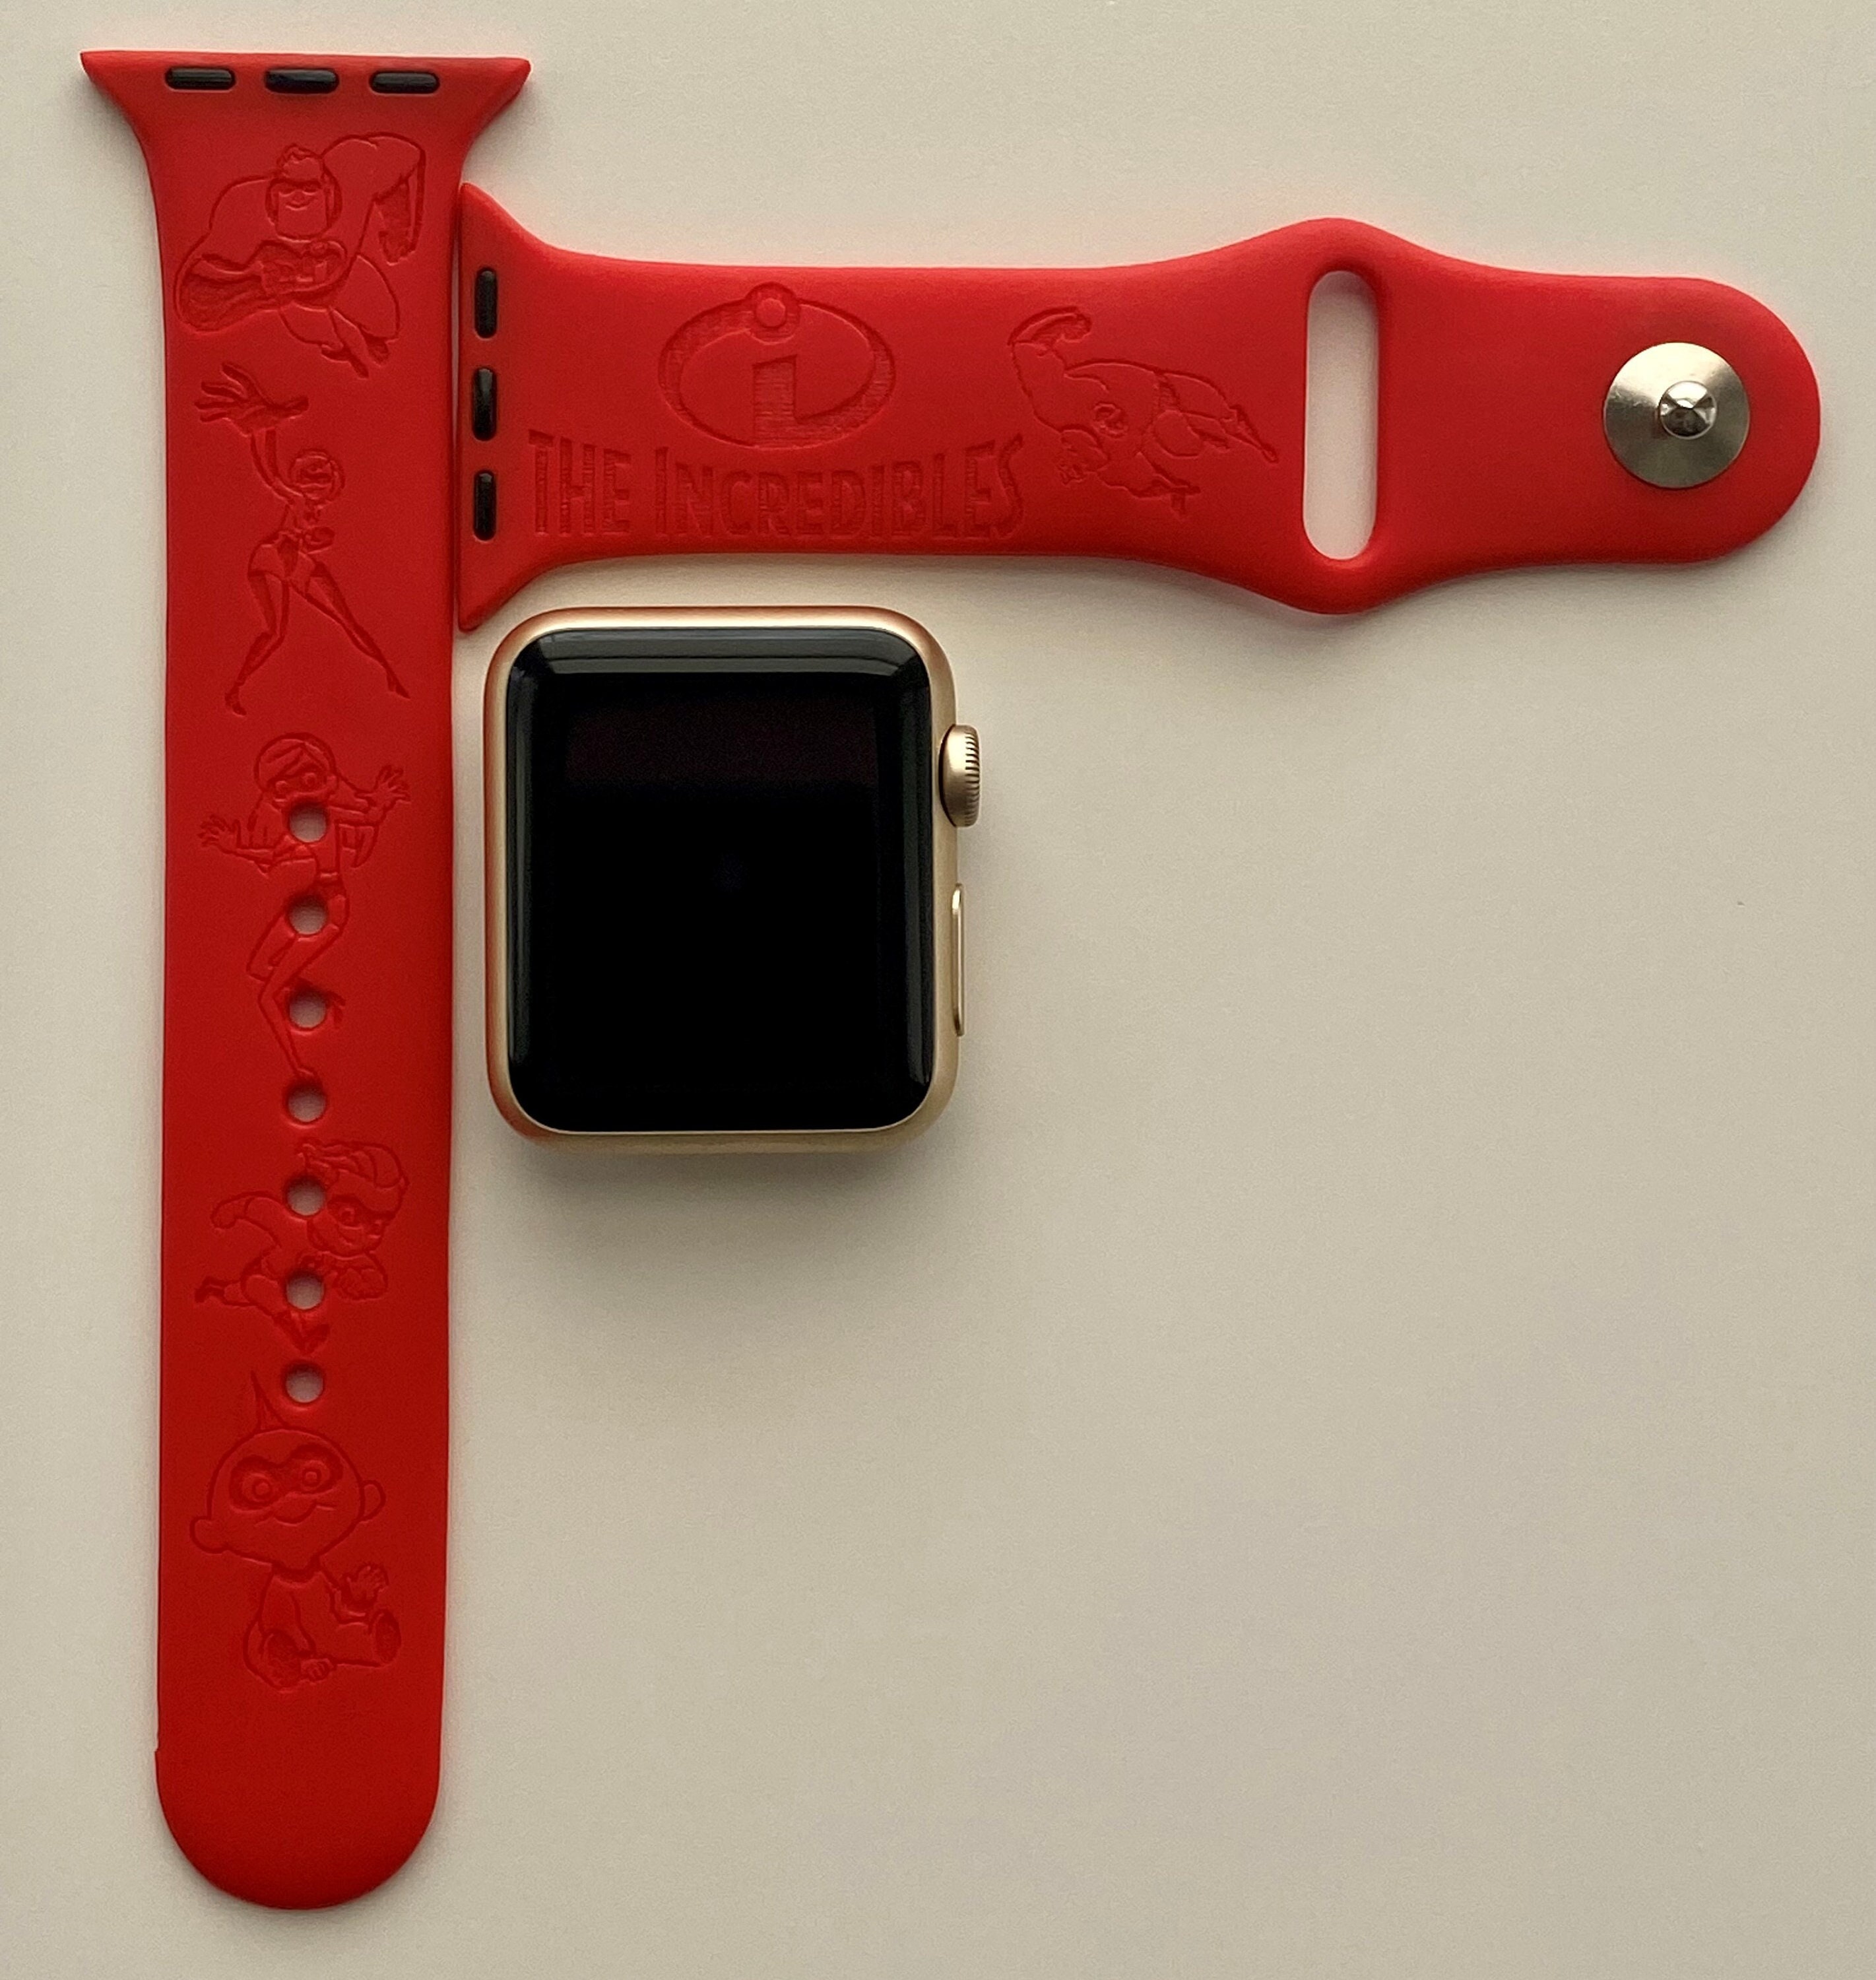 Incredibles Engraved Apple Watch Band 24 Colors 38mm 40mm 